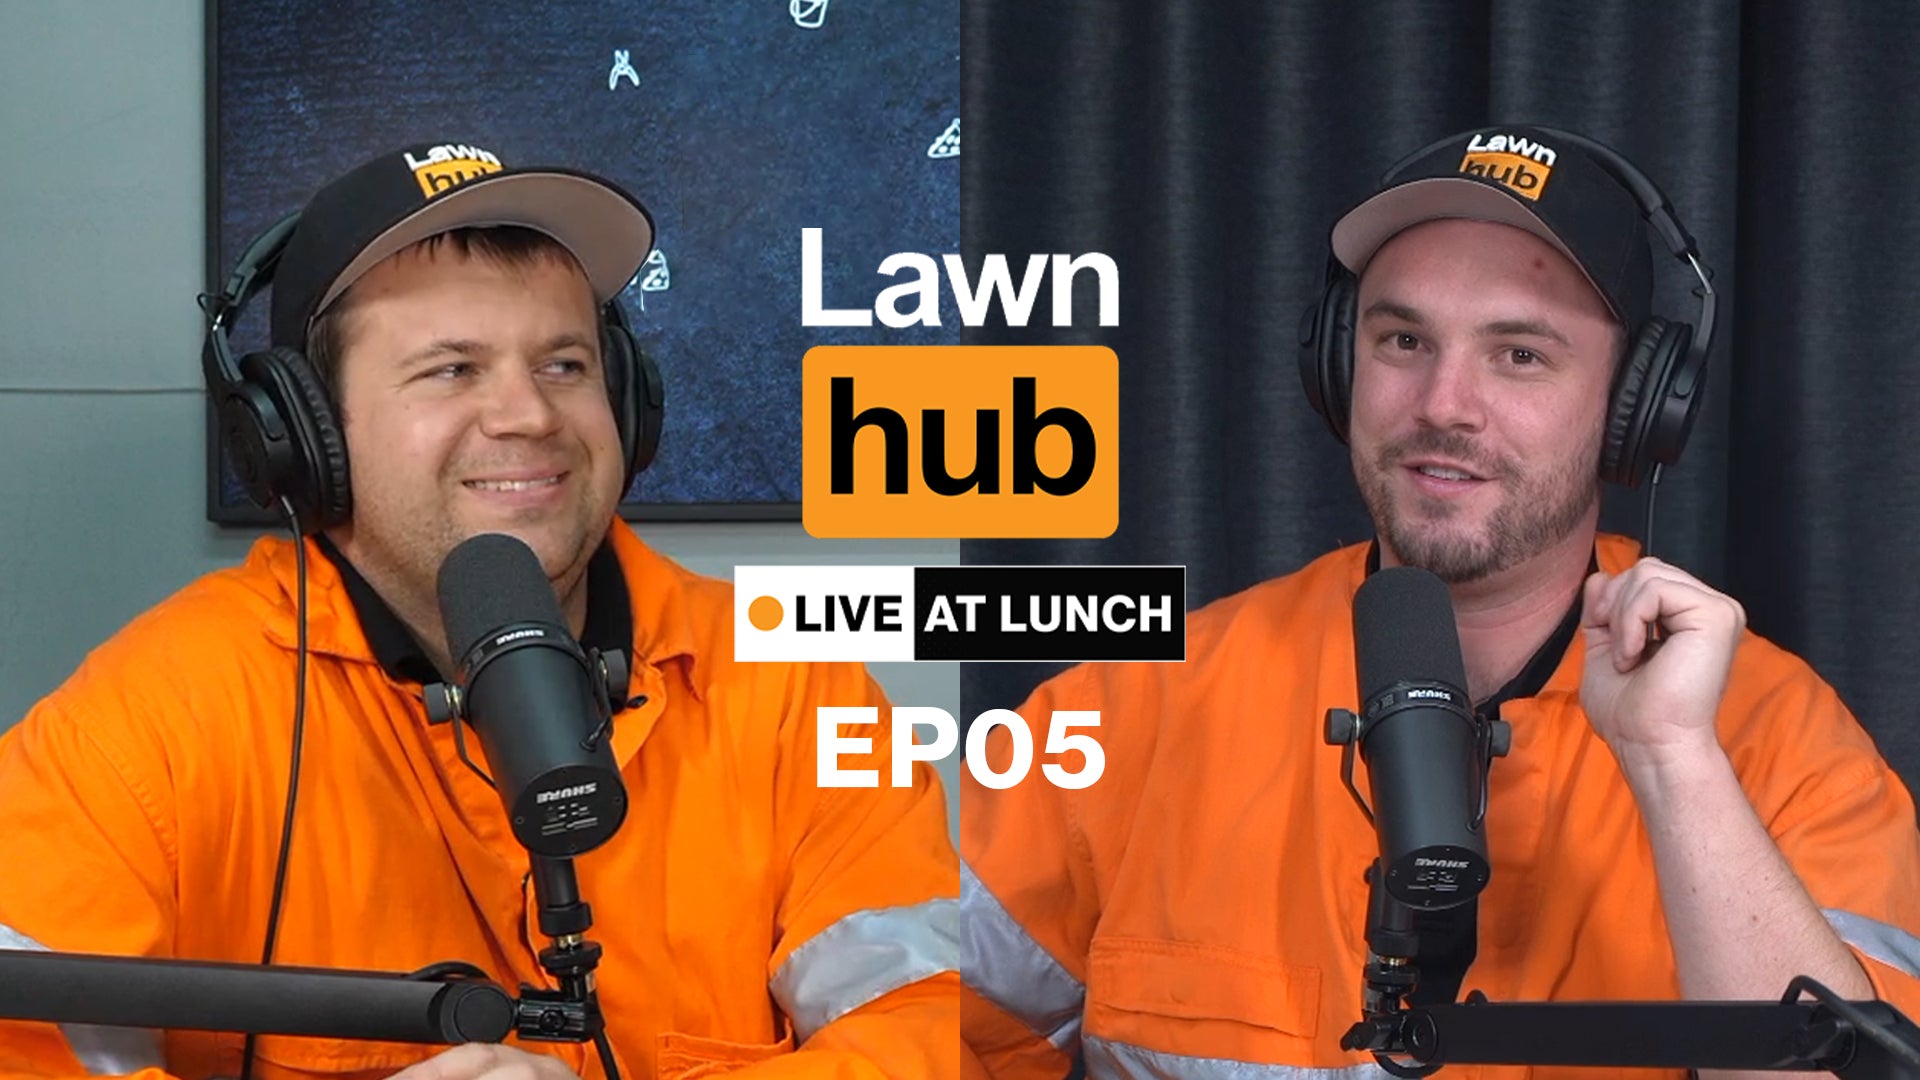 Watch Lawnhub Live at Lunch EP05